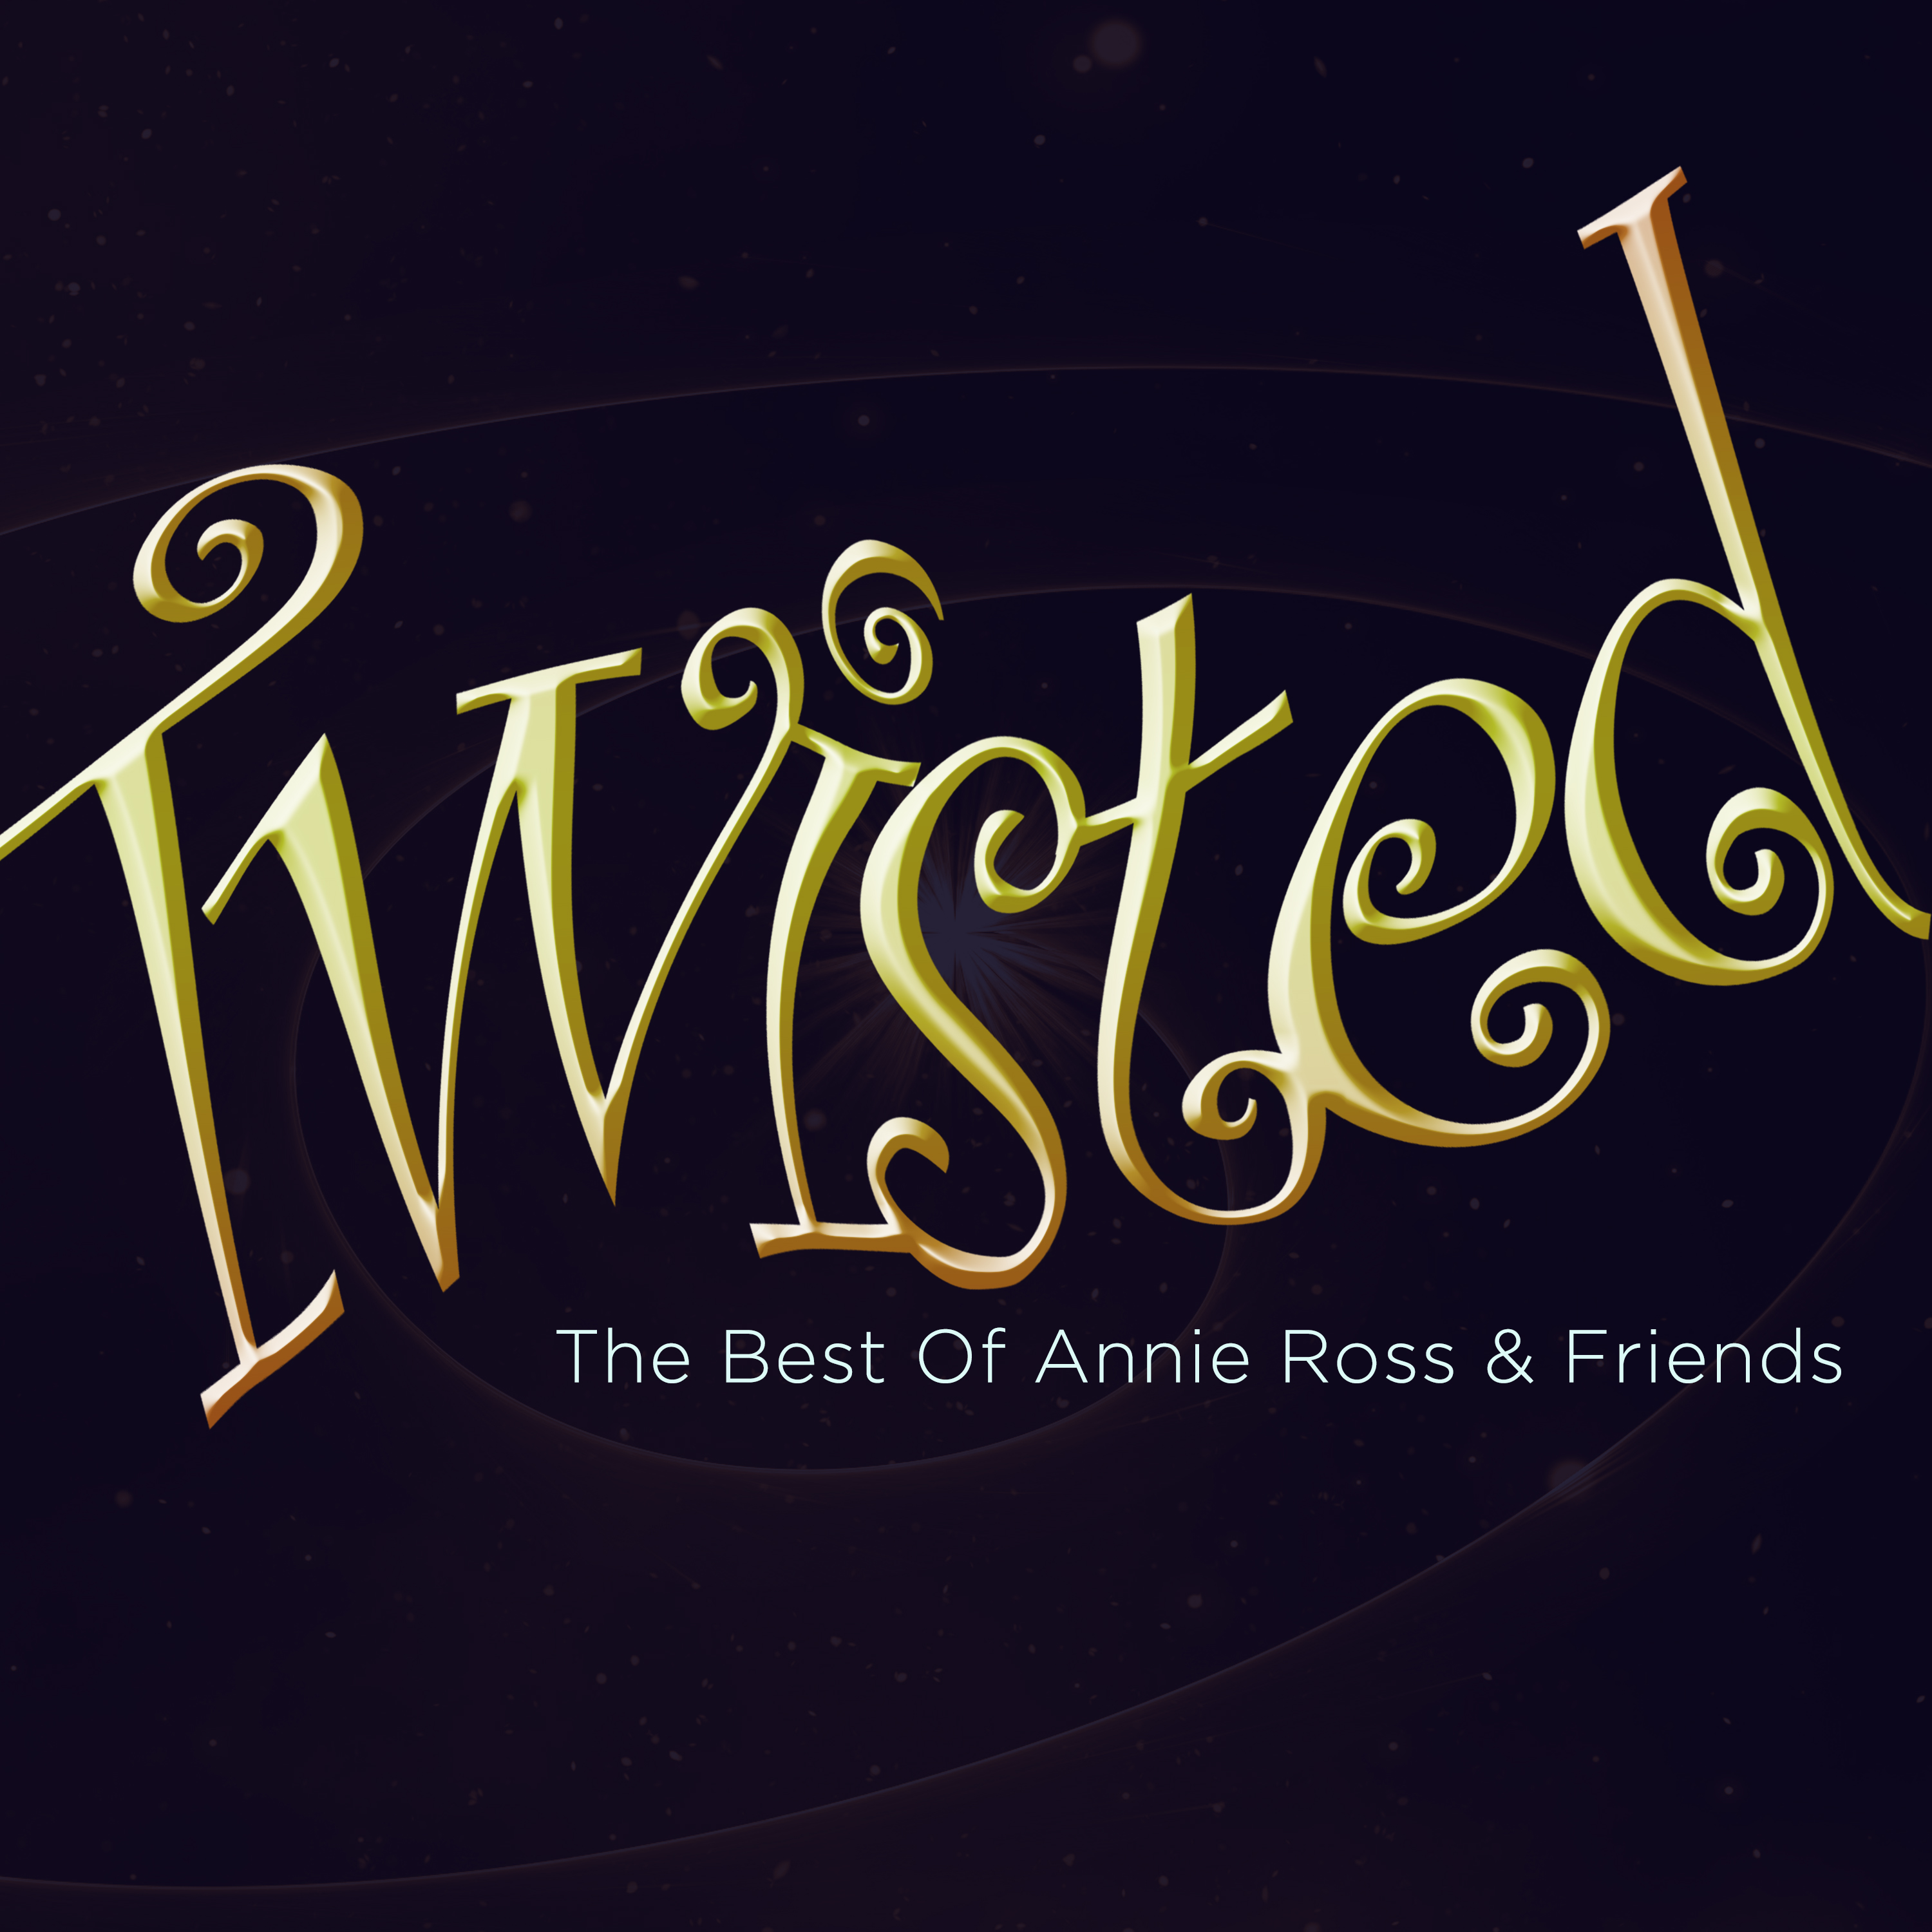 Twisted - The Best of Annie Ross & Friends